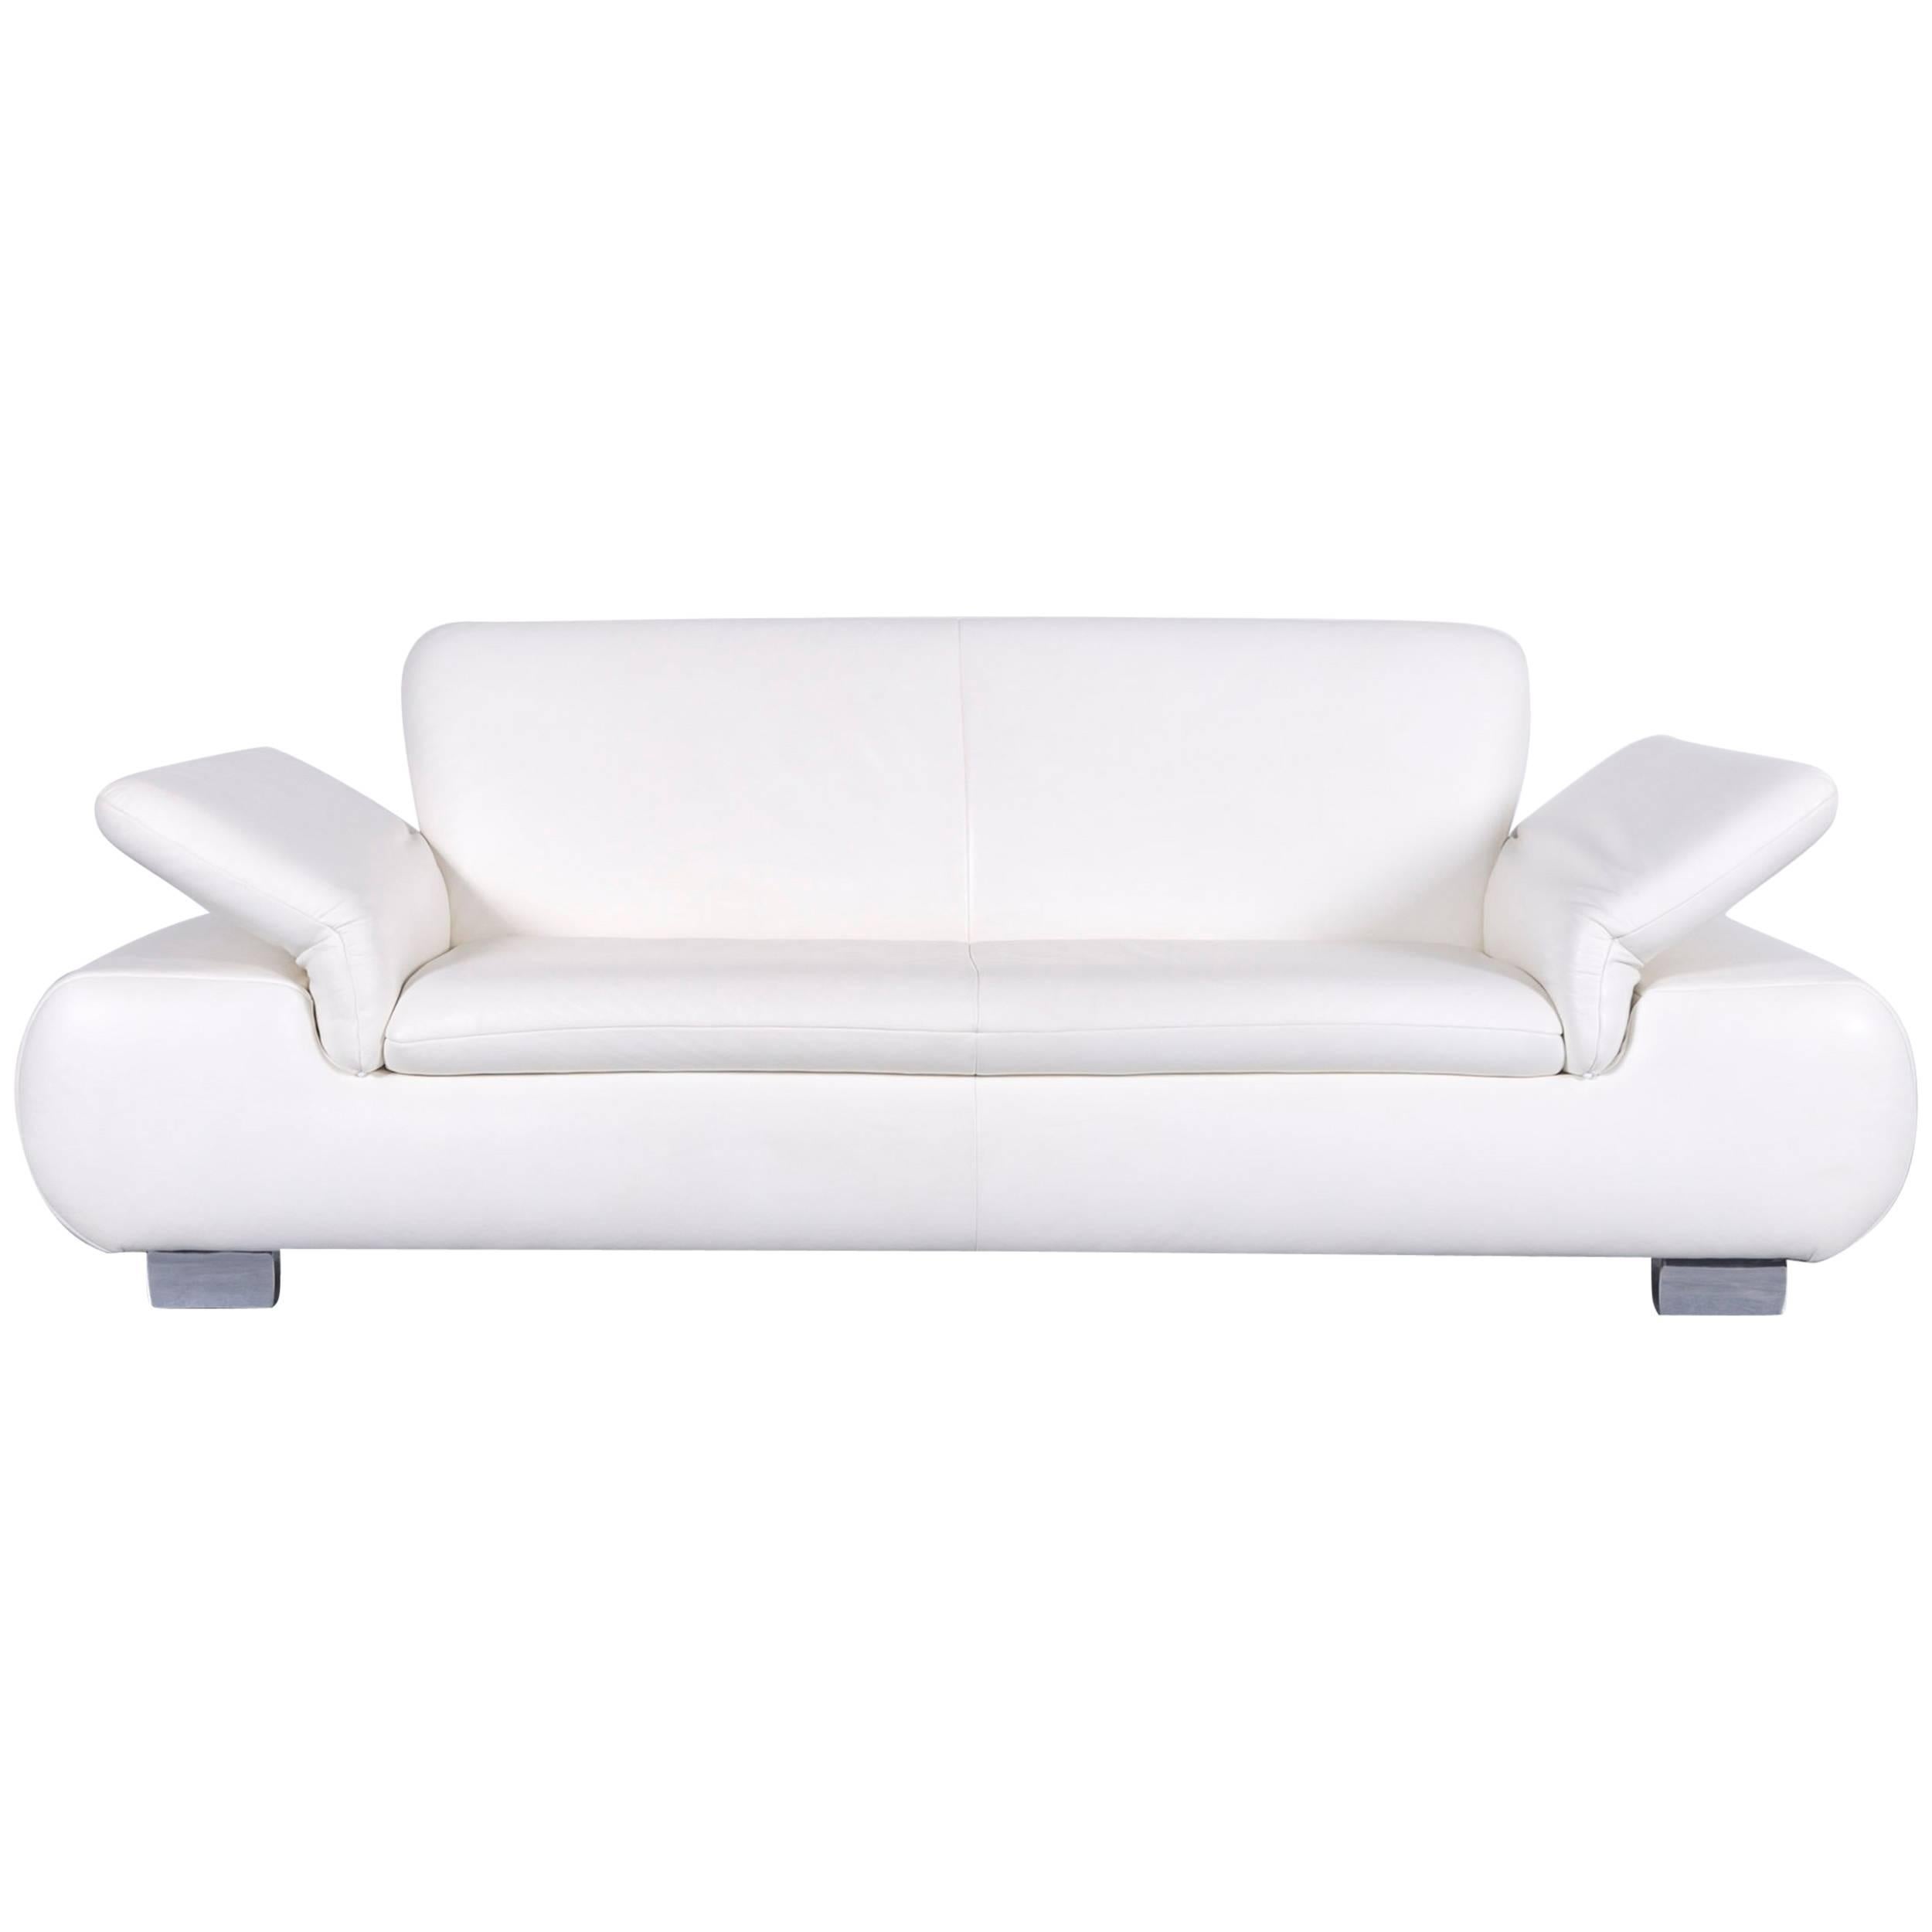 Koinor Designer Three-Seat Sofa White Leather Function Couch